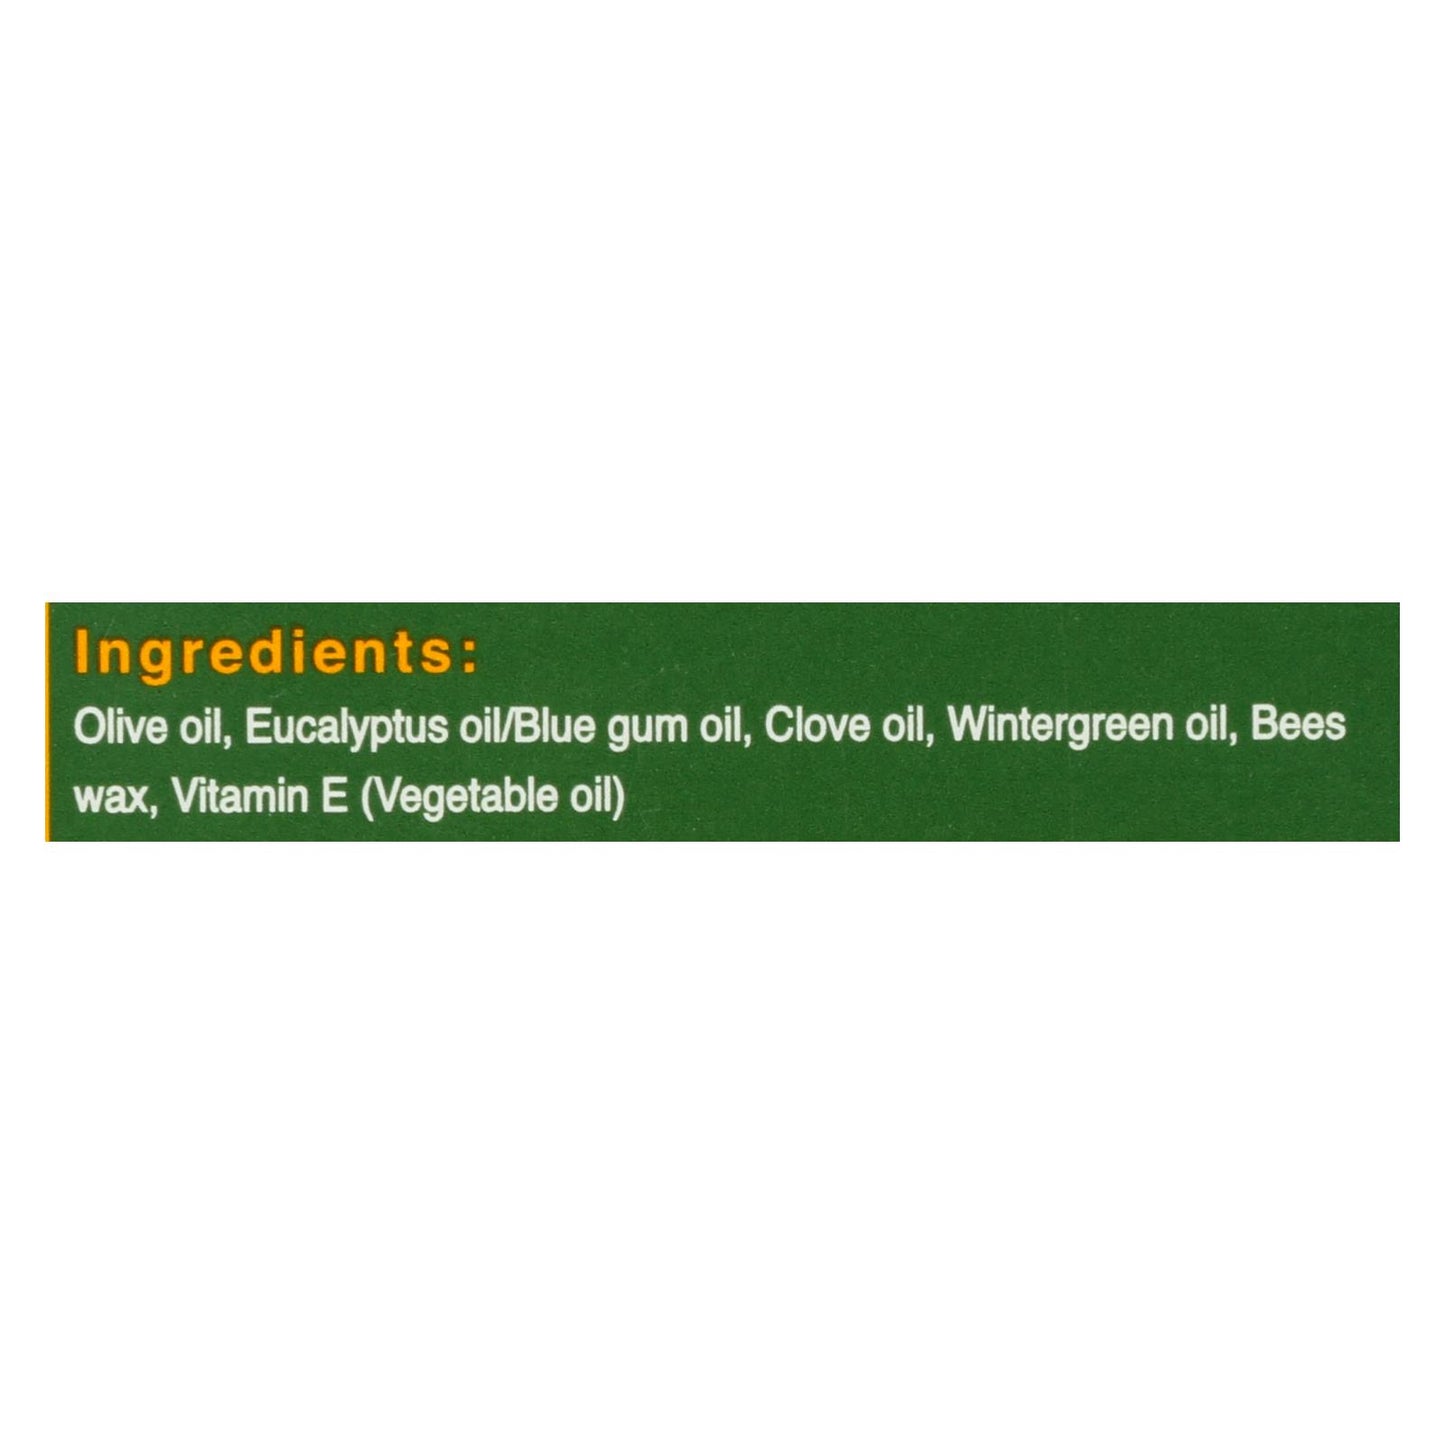 
                  
                    Herbion Naturals All Natural Chest Rub Ointment , 1 Each, 3.53 Oz
                  
                